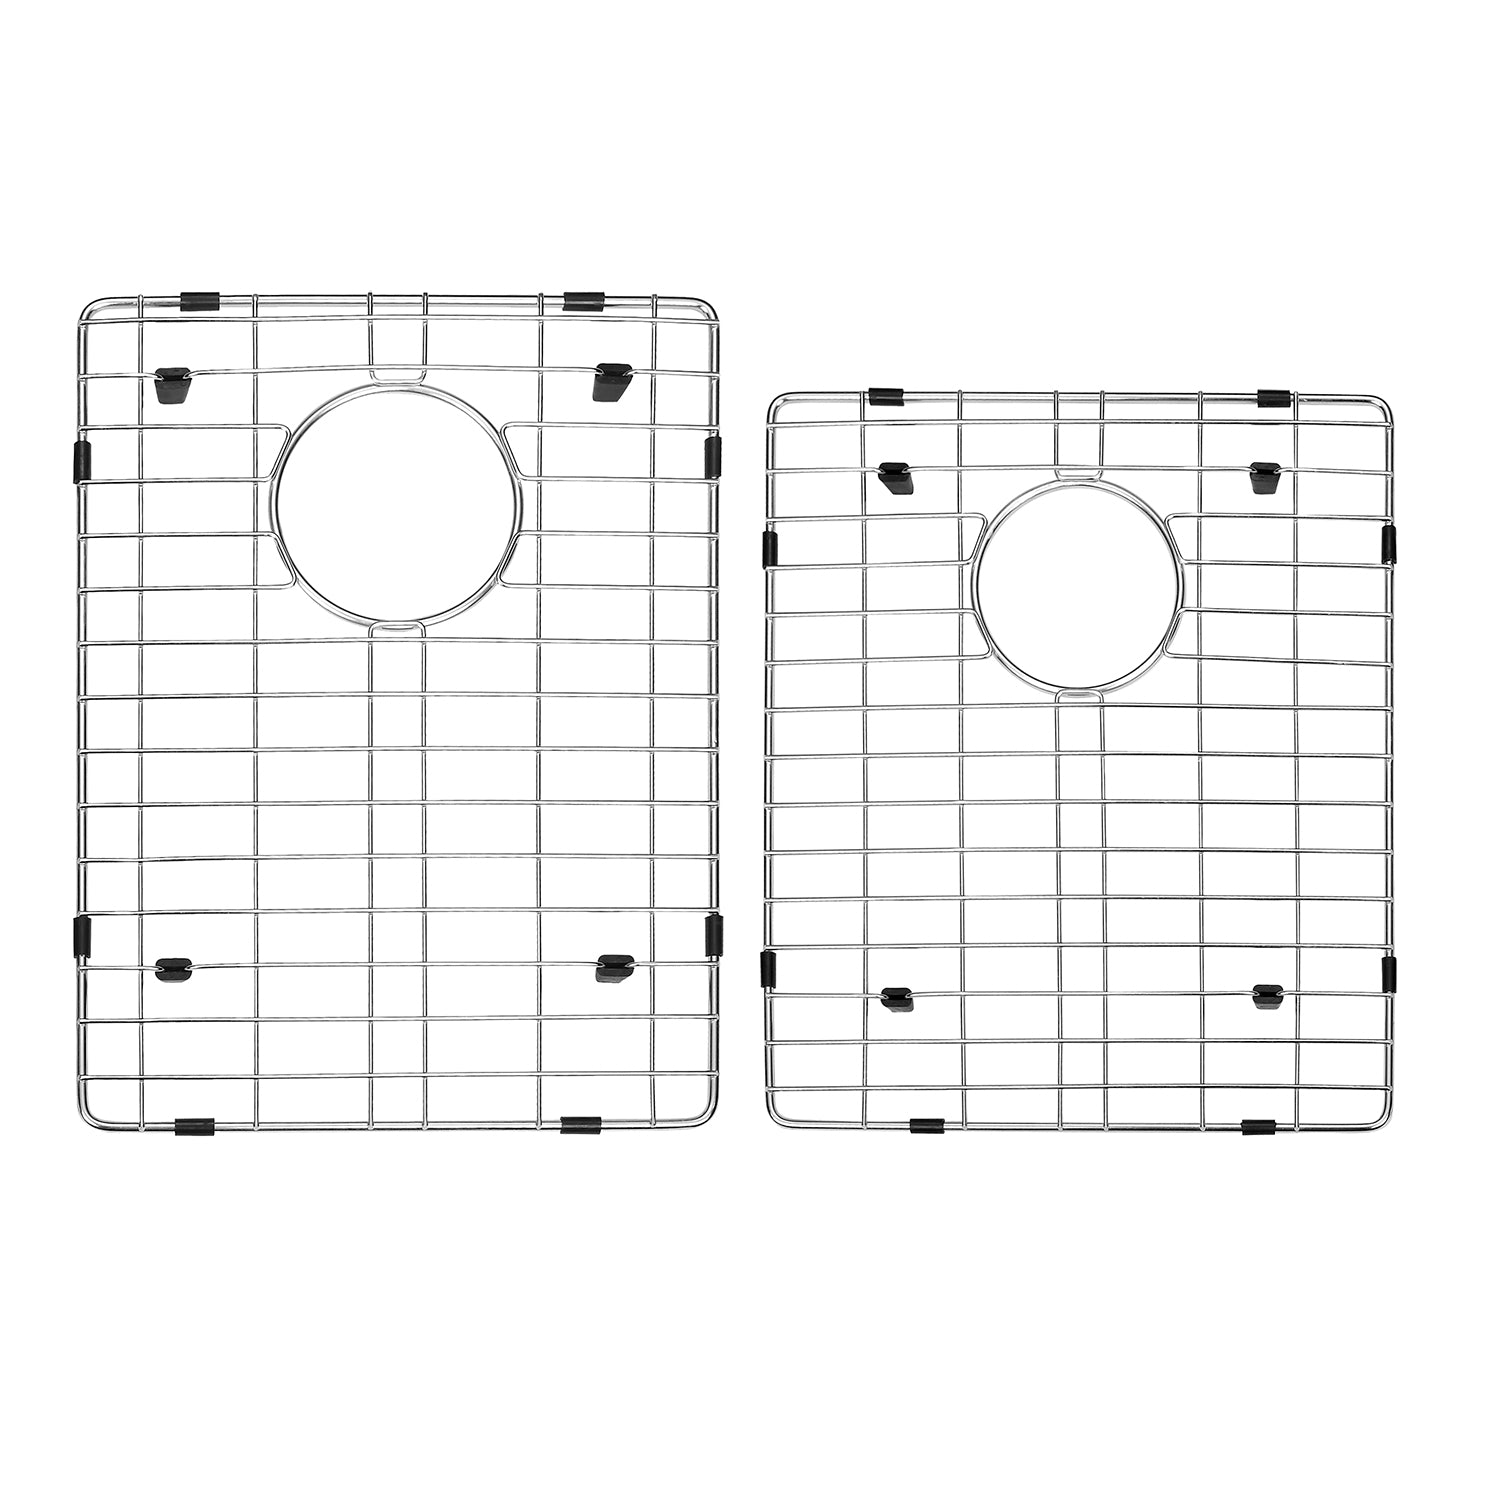 DAX Grid for Kitchen Sink, Stainless Steel Body, Chrome Finish, Compatible with DAX-3118B, 16-3/4 x 14-1/4 Inches (GRID-3118B)